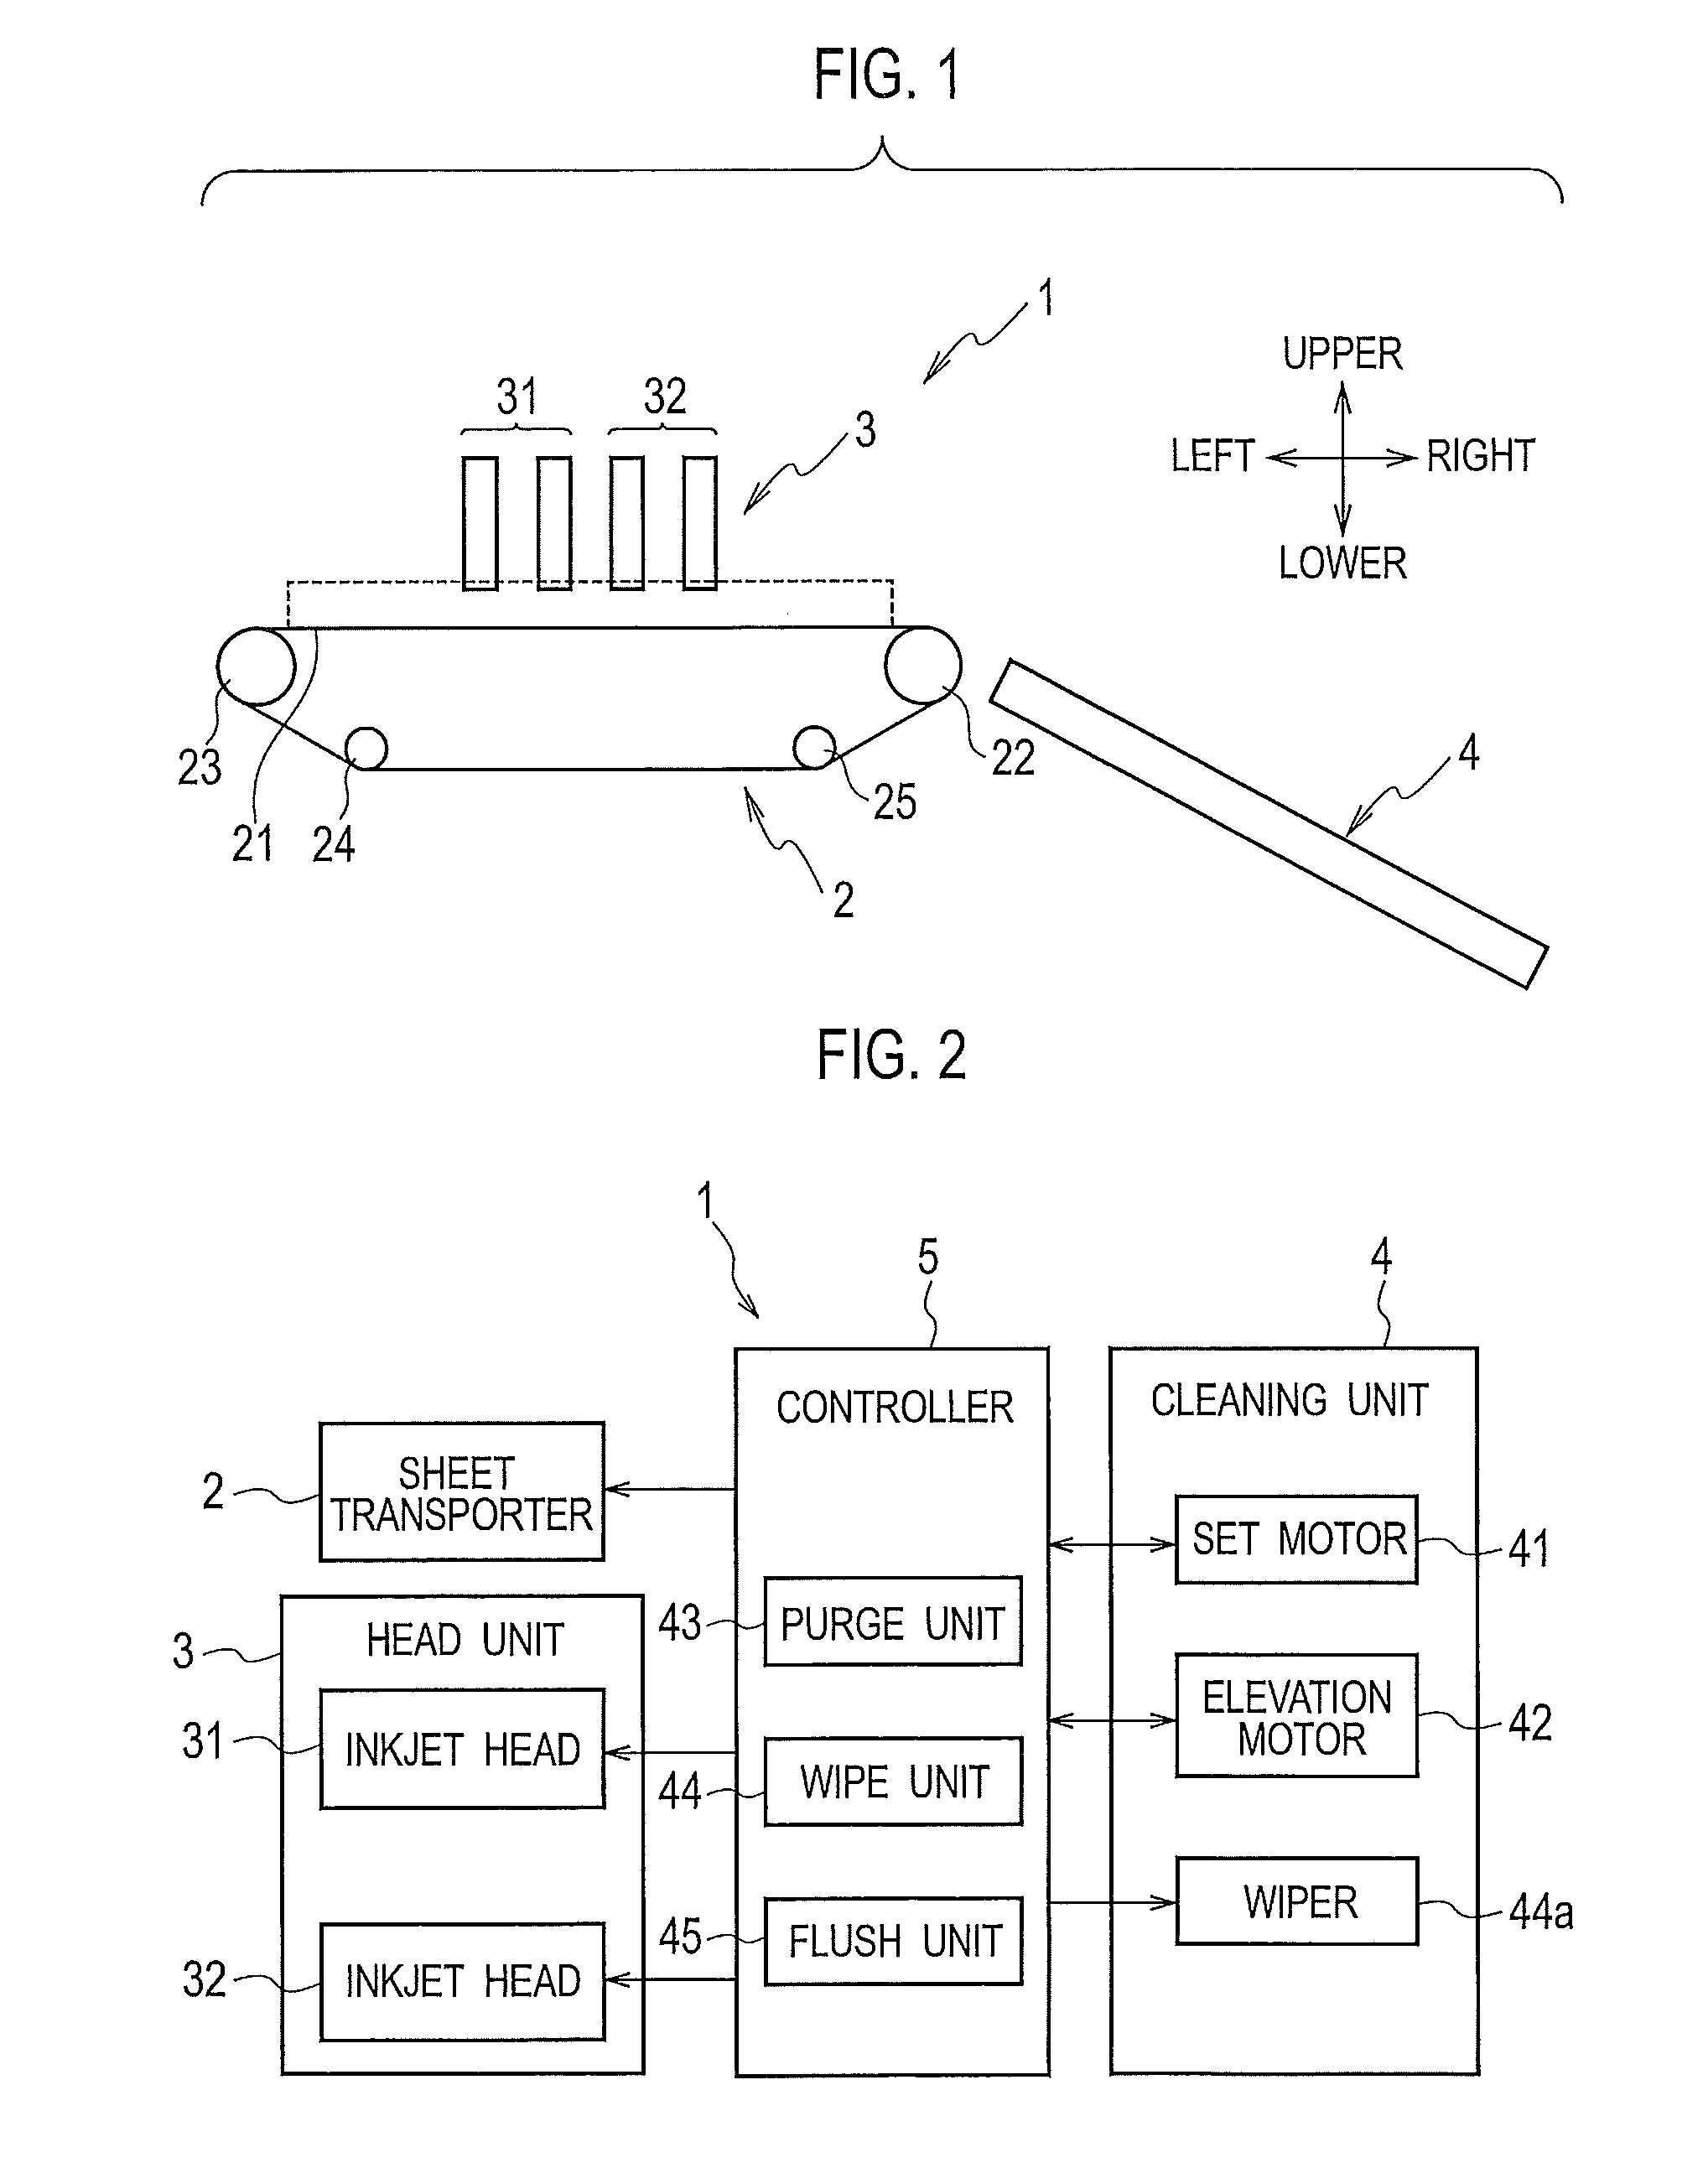 Inkjet image forming apparatus and cleaning method for inkjet image forming apparatus